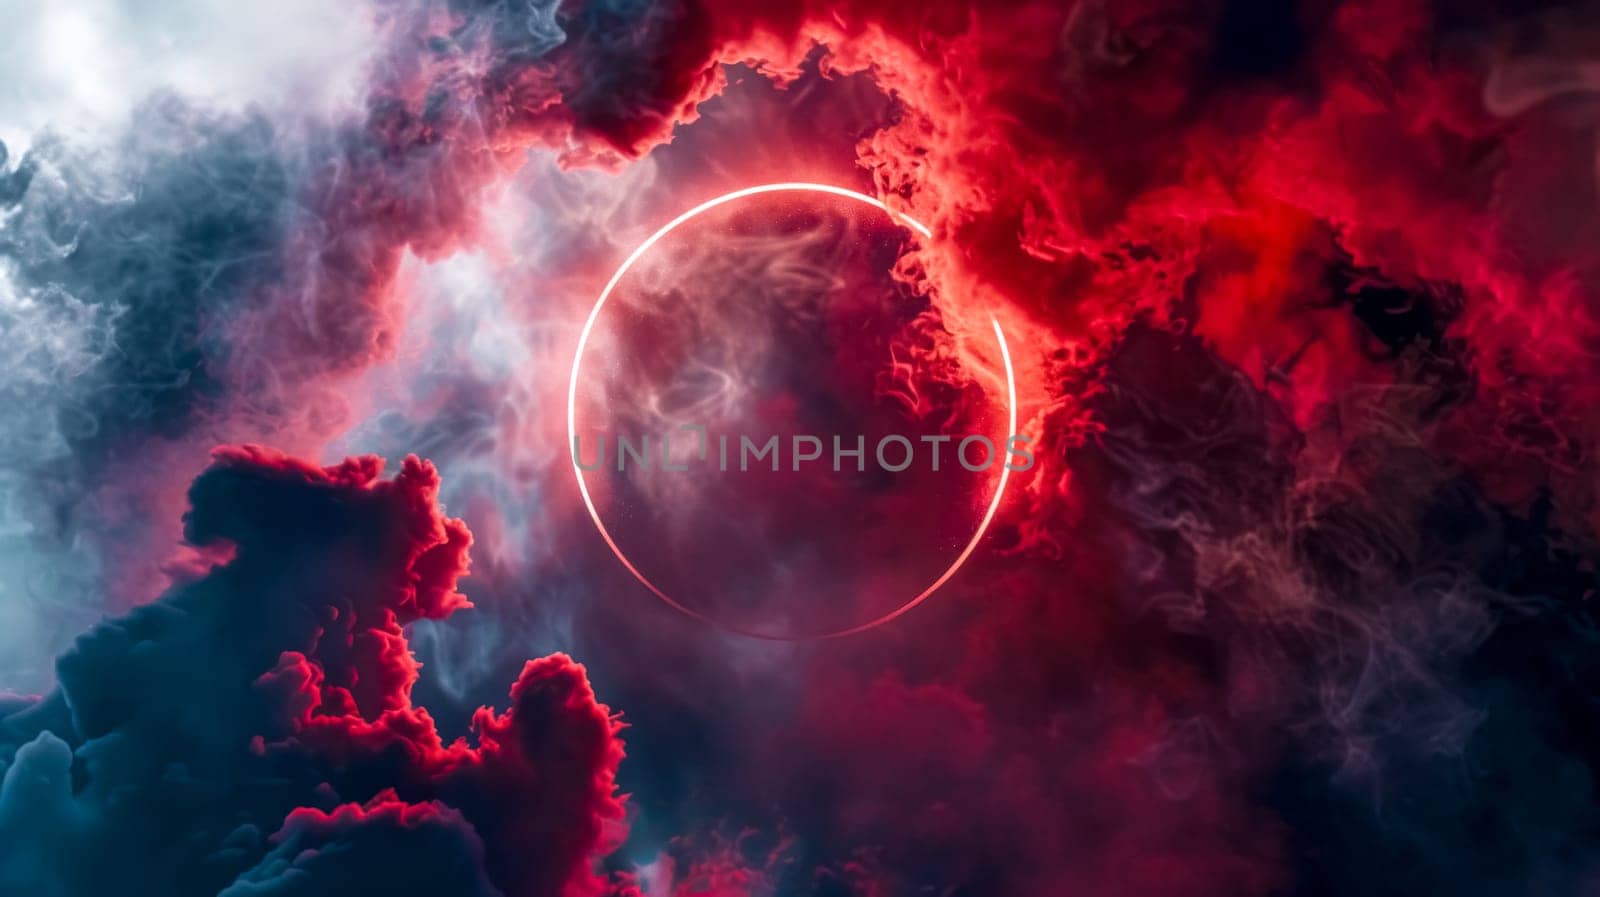 Ethereal red eclipse in mystical nebula clouds by Edophoto